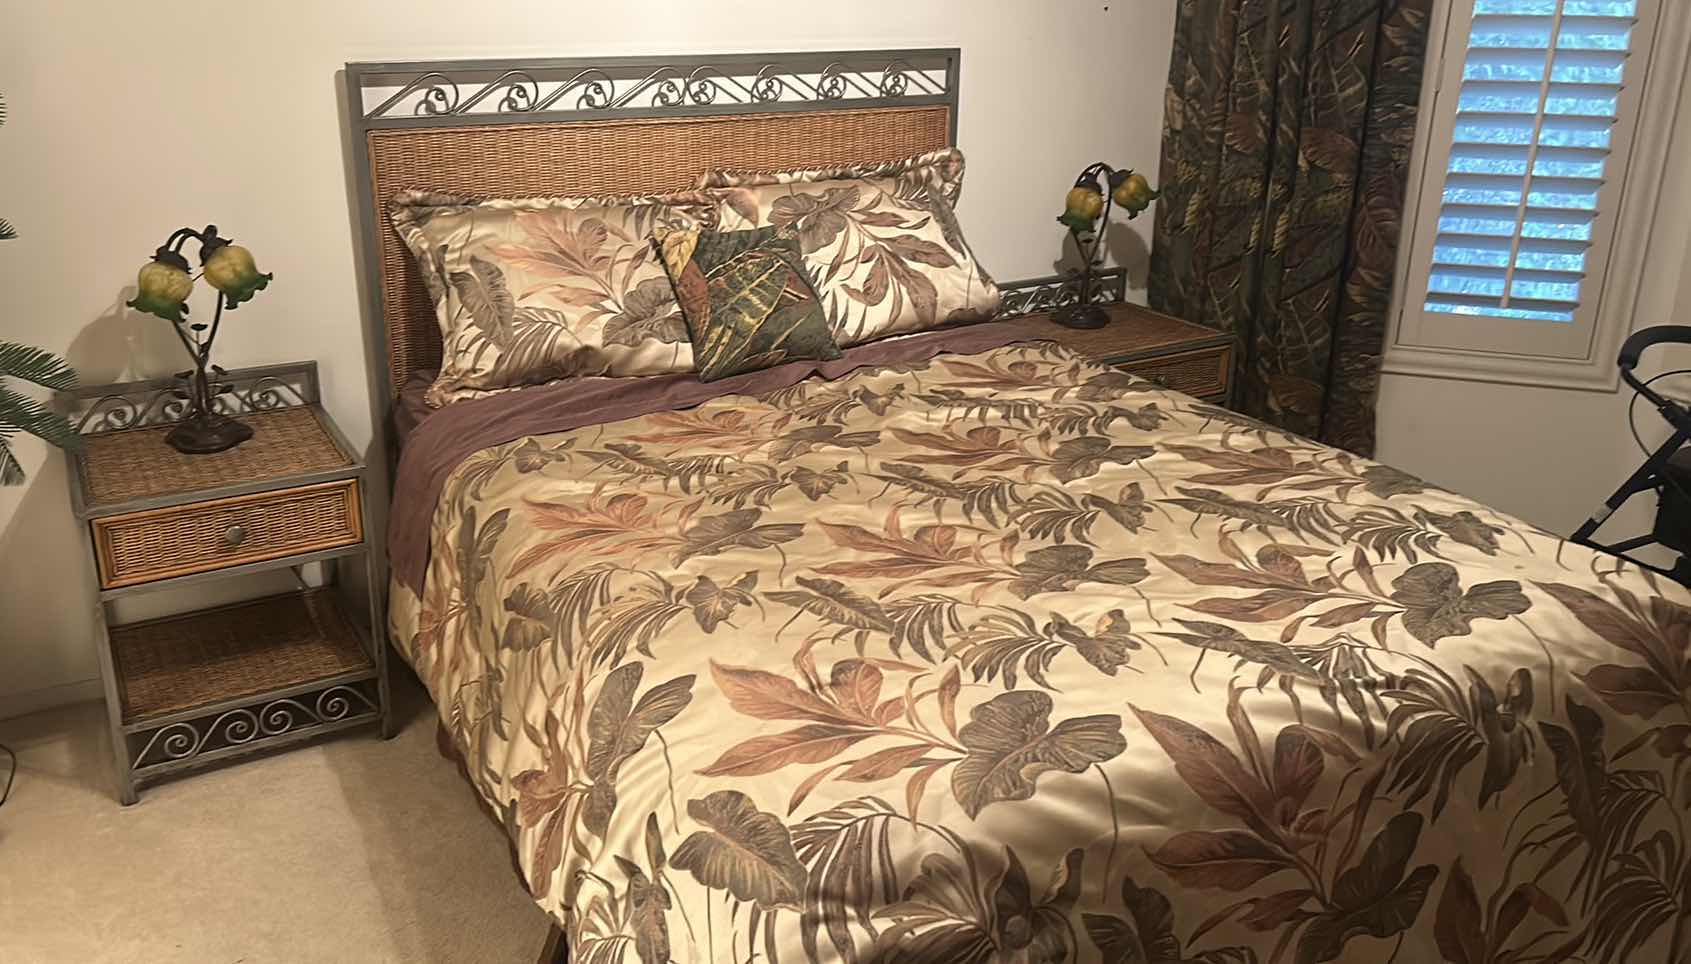 Photo 1 of METAL AND RATAN HEADBOARD 5’ x 52 1/2” AND TWO NIGHTSTANDS 23“ x 19“ x 23 1/2“